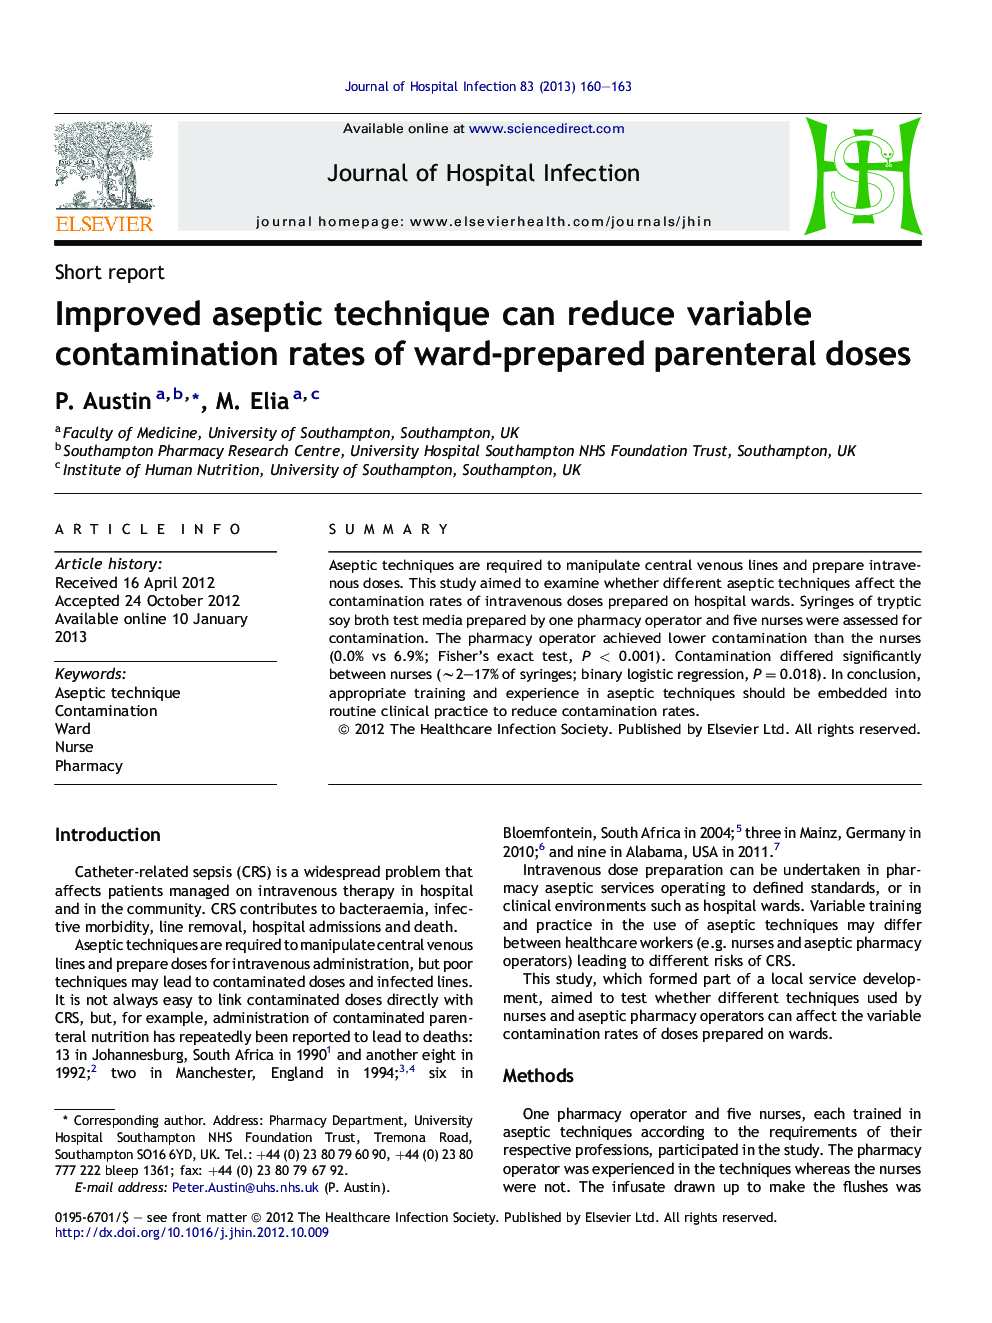 Improved aseptic technique can reduce variable contamination rates of ward-prepared parenteral doses